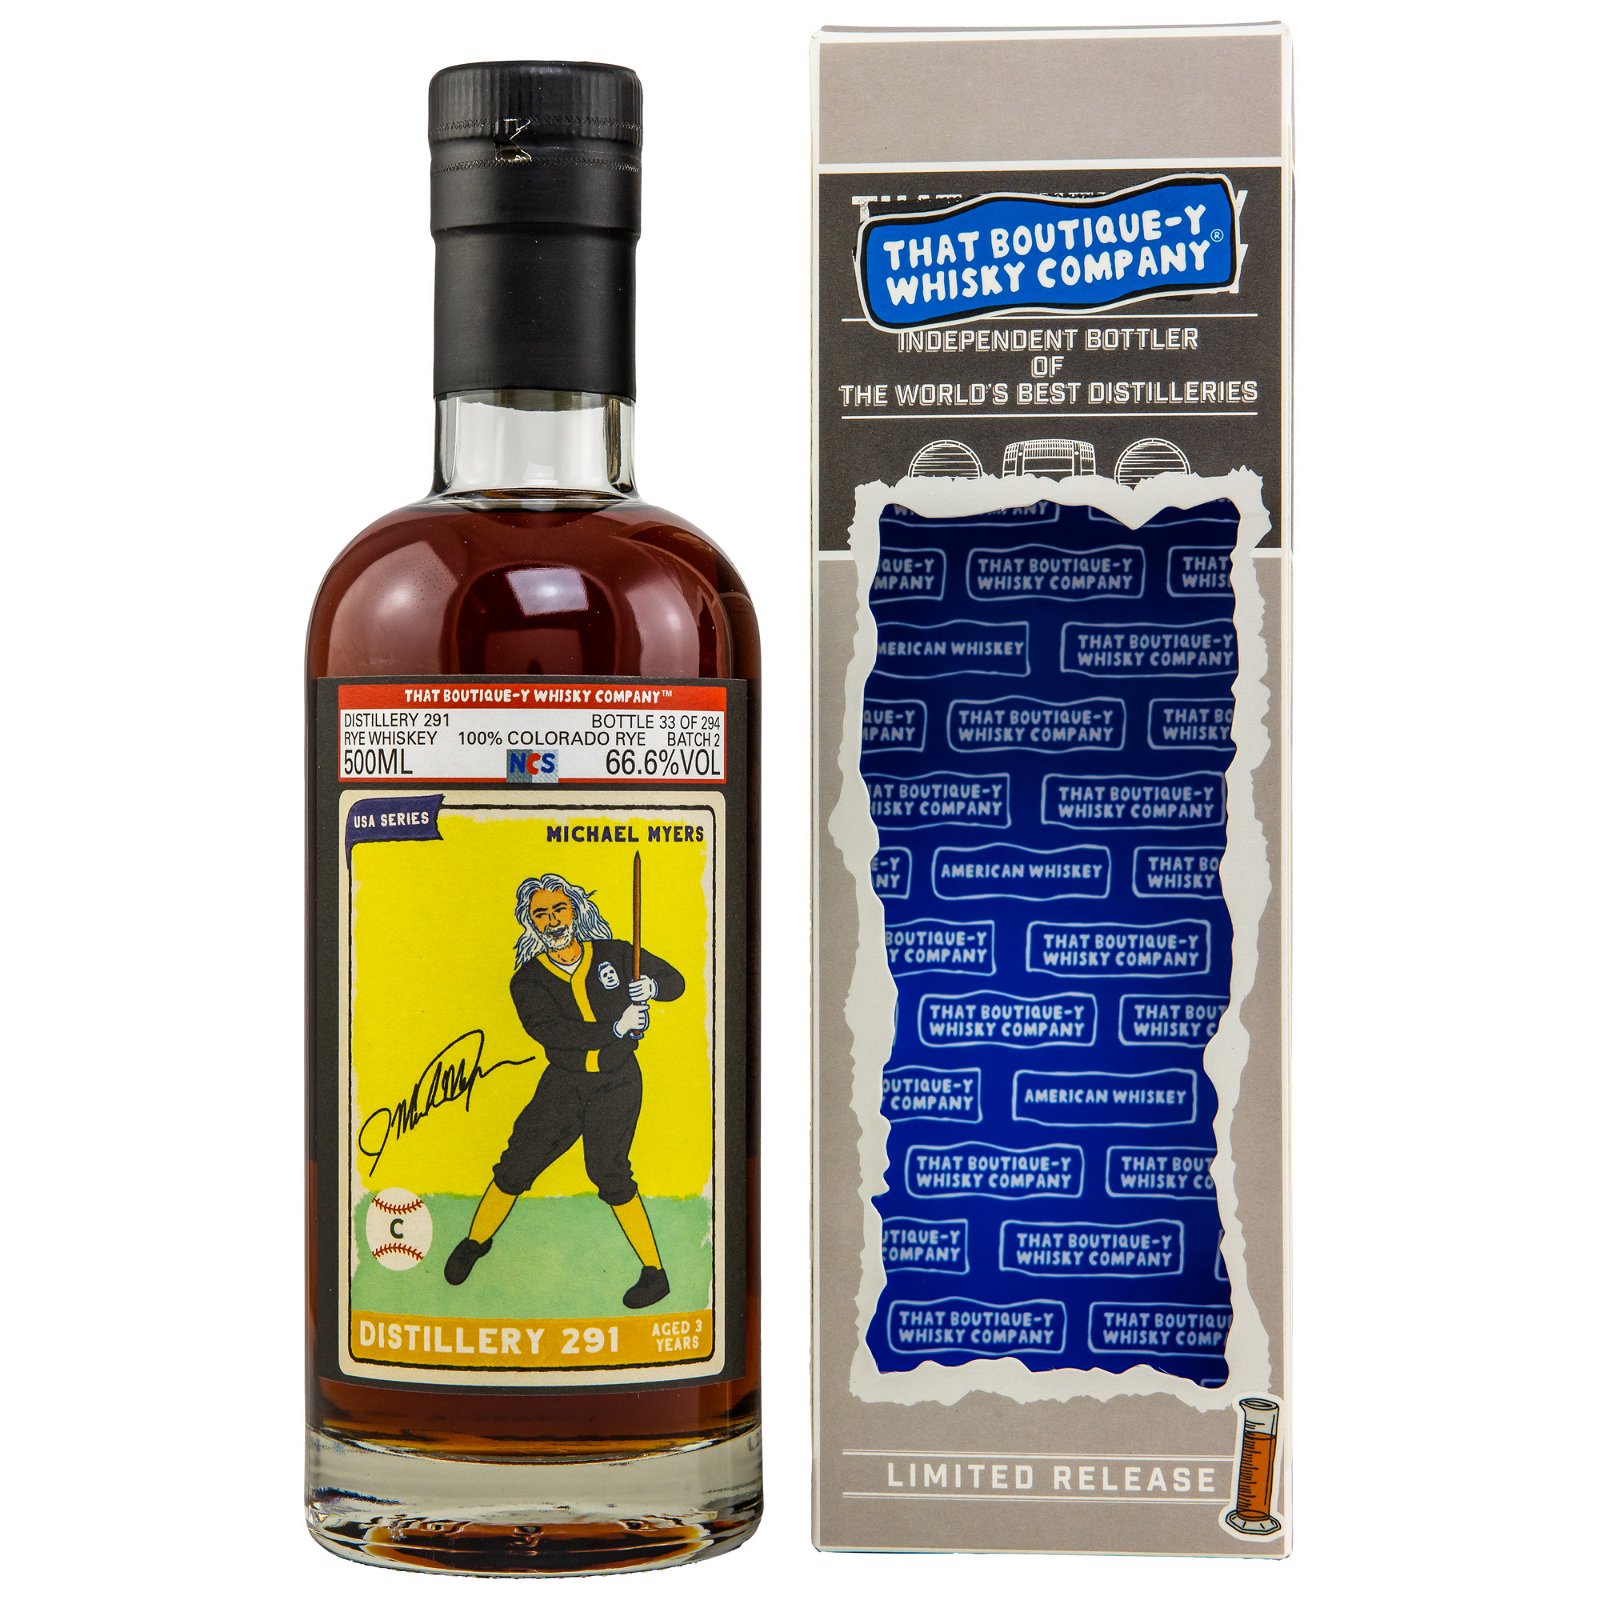 Distillery 291 - 3 Jahre Batch 2 USA Series (That Boutique-y Whisky Company)